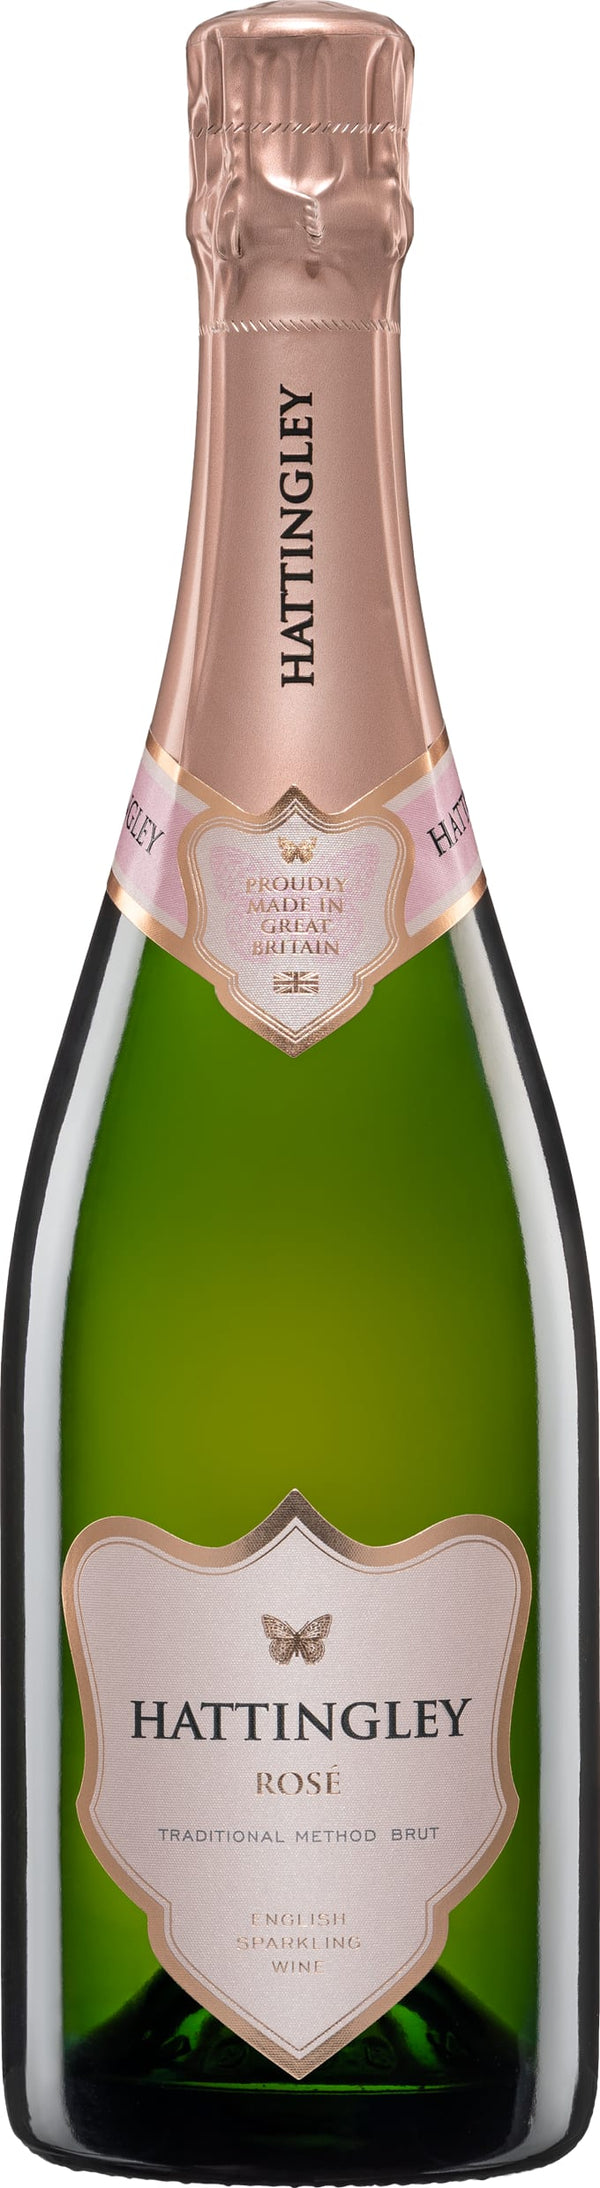 Hattingley Valley Rose Brut 2020 6x75cl - Just Wines 